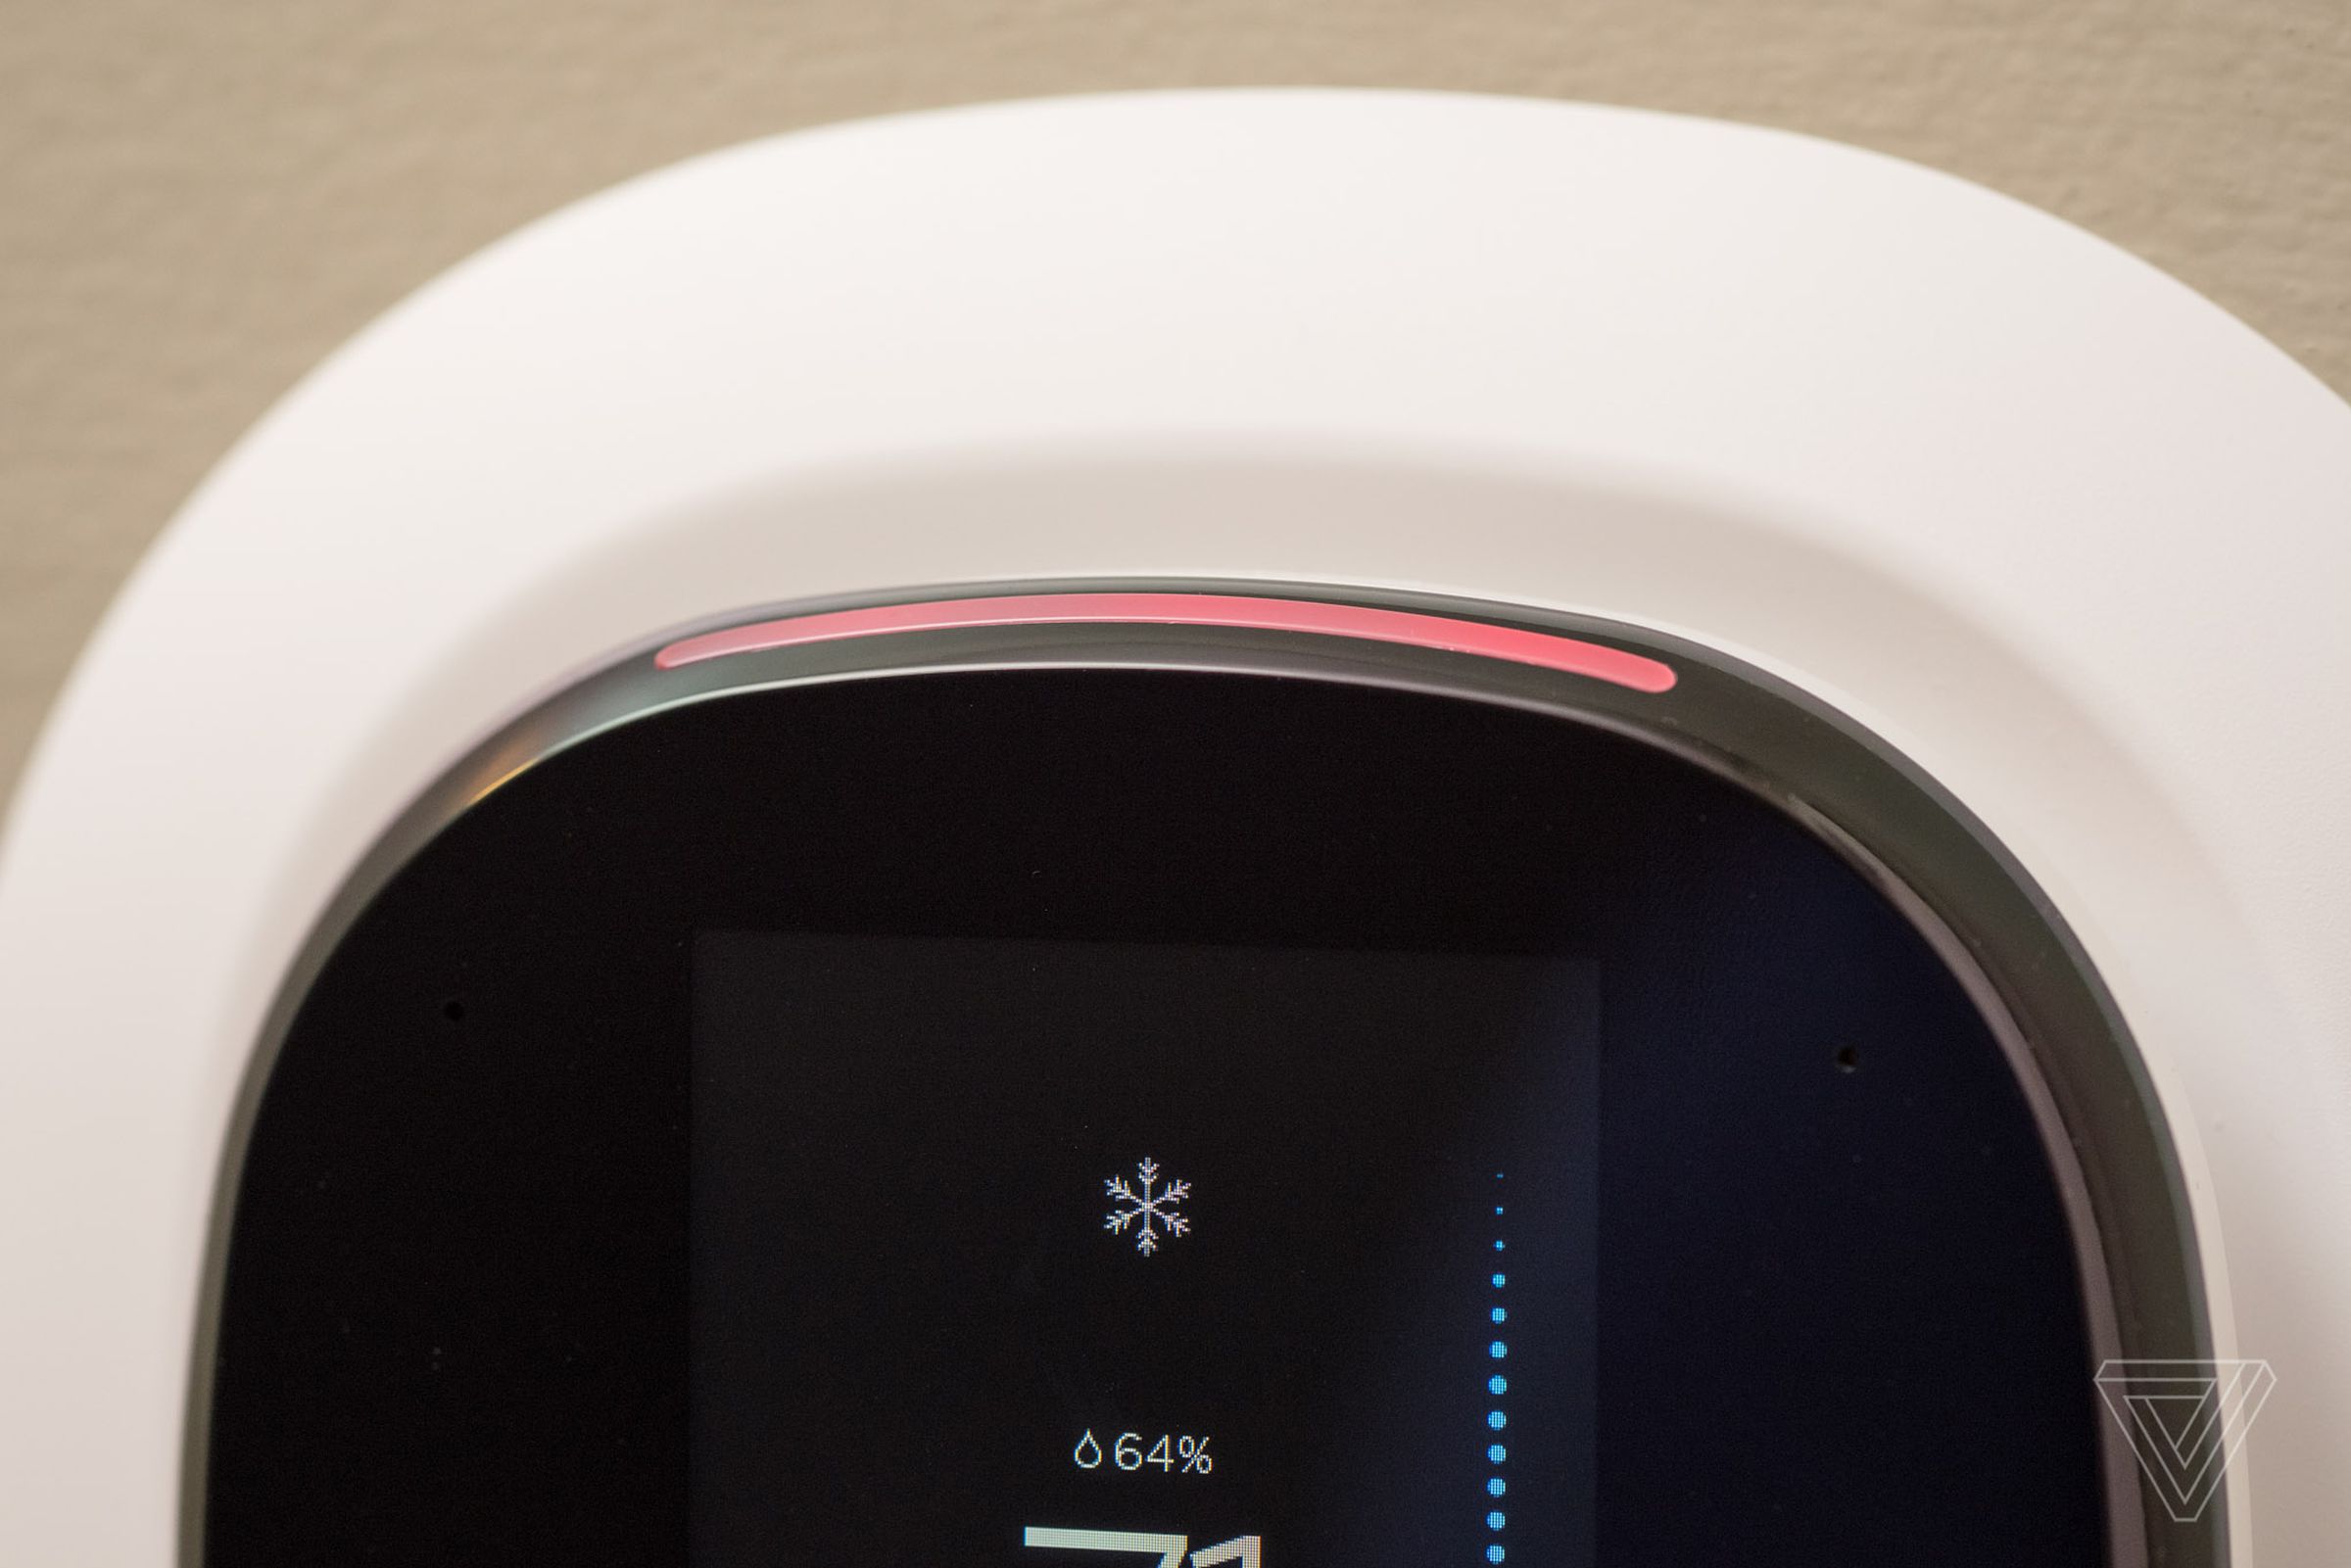 Turn off the always listening feature and the Ecobee4 will display a bright red light at all hours of the day.